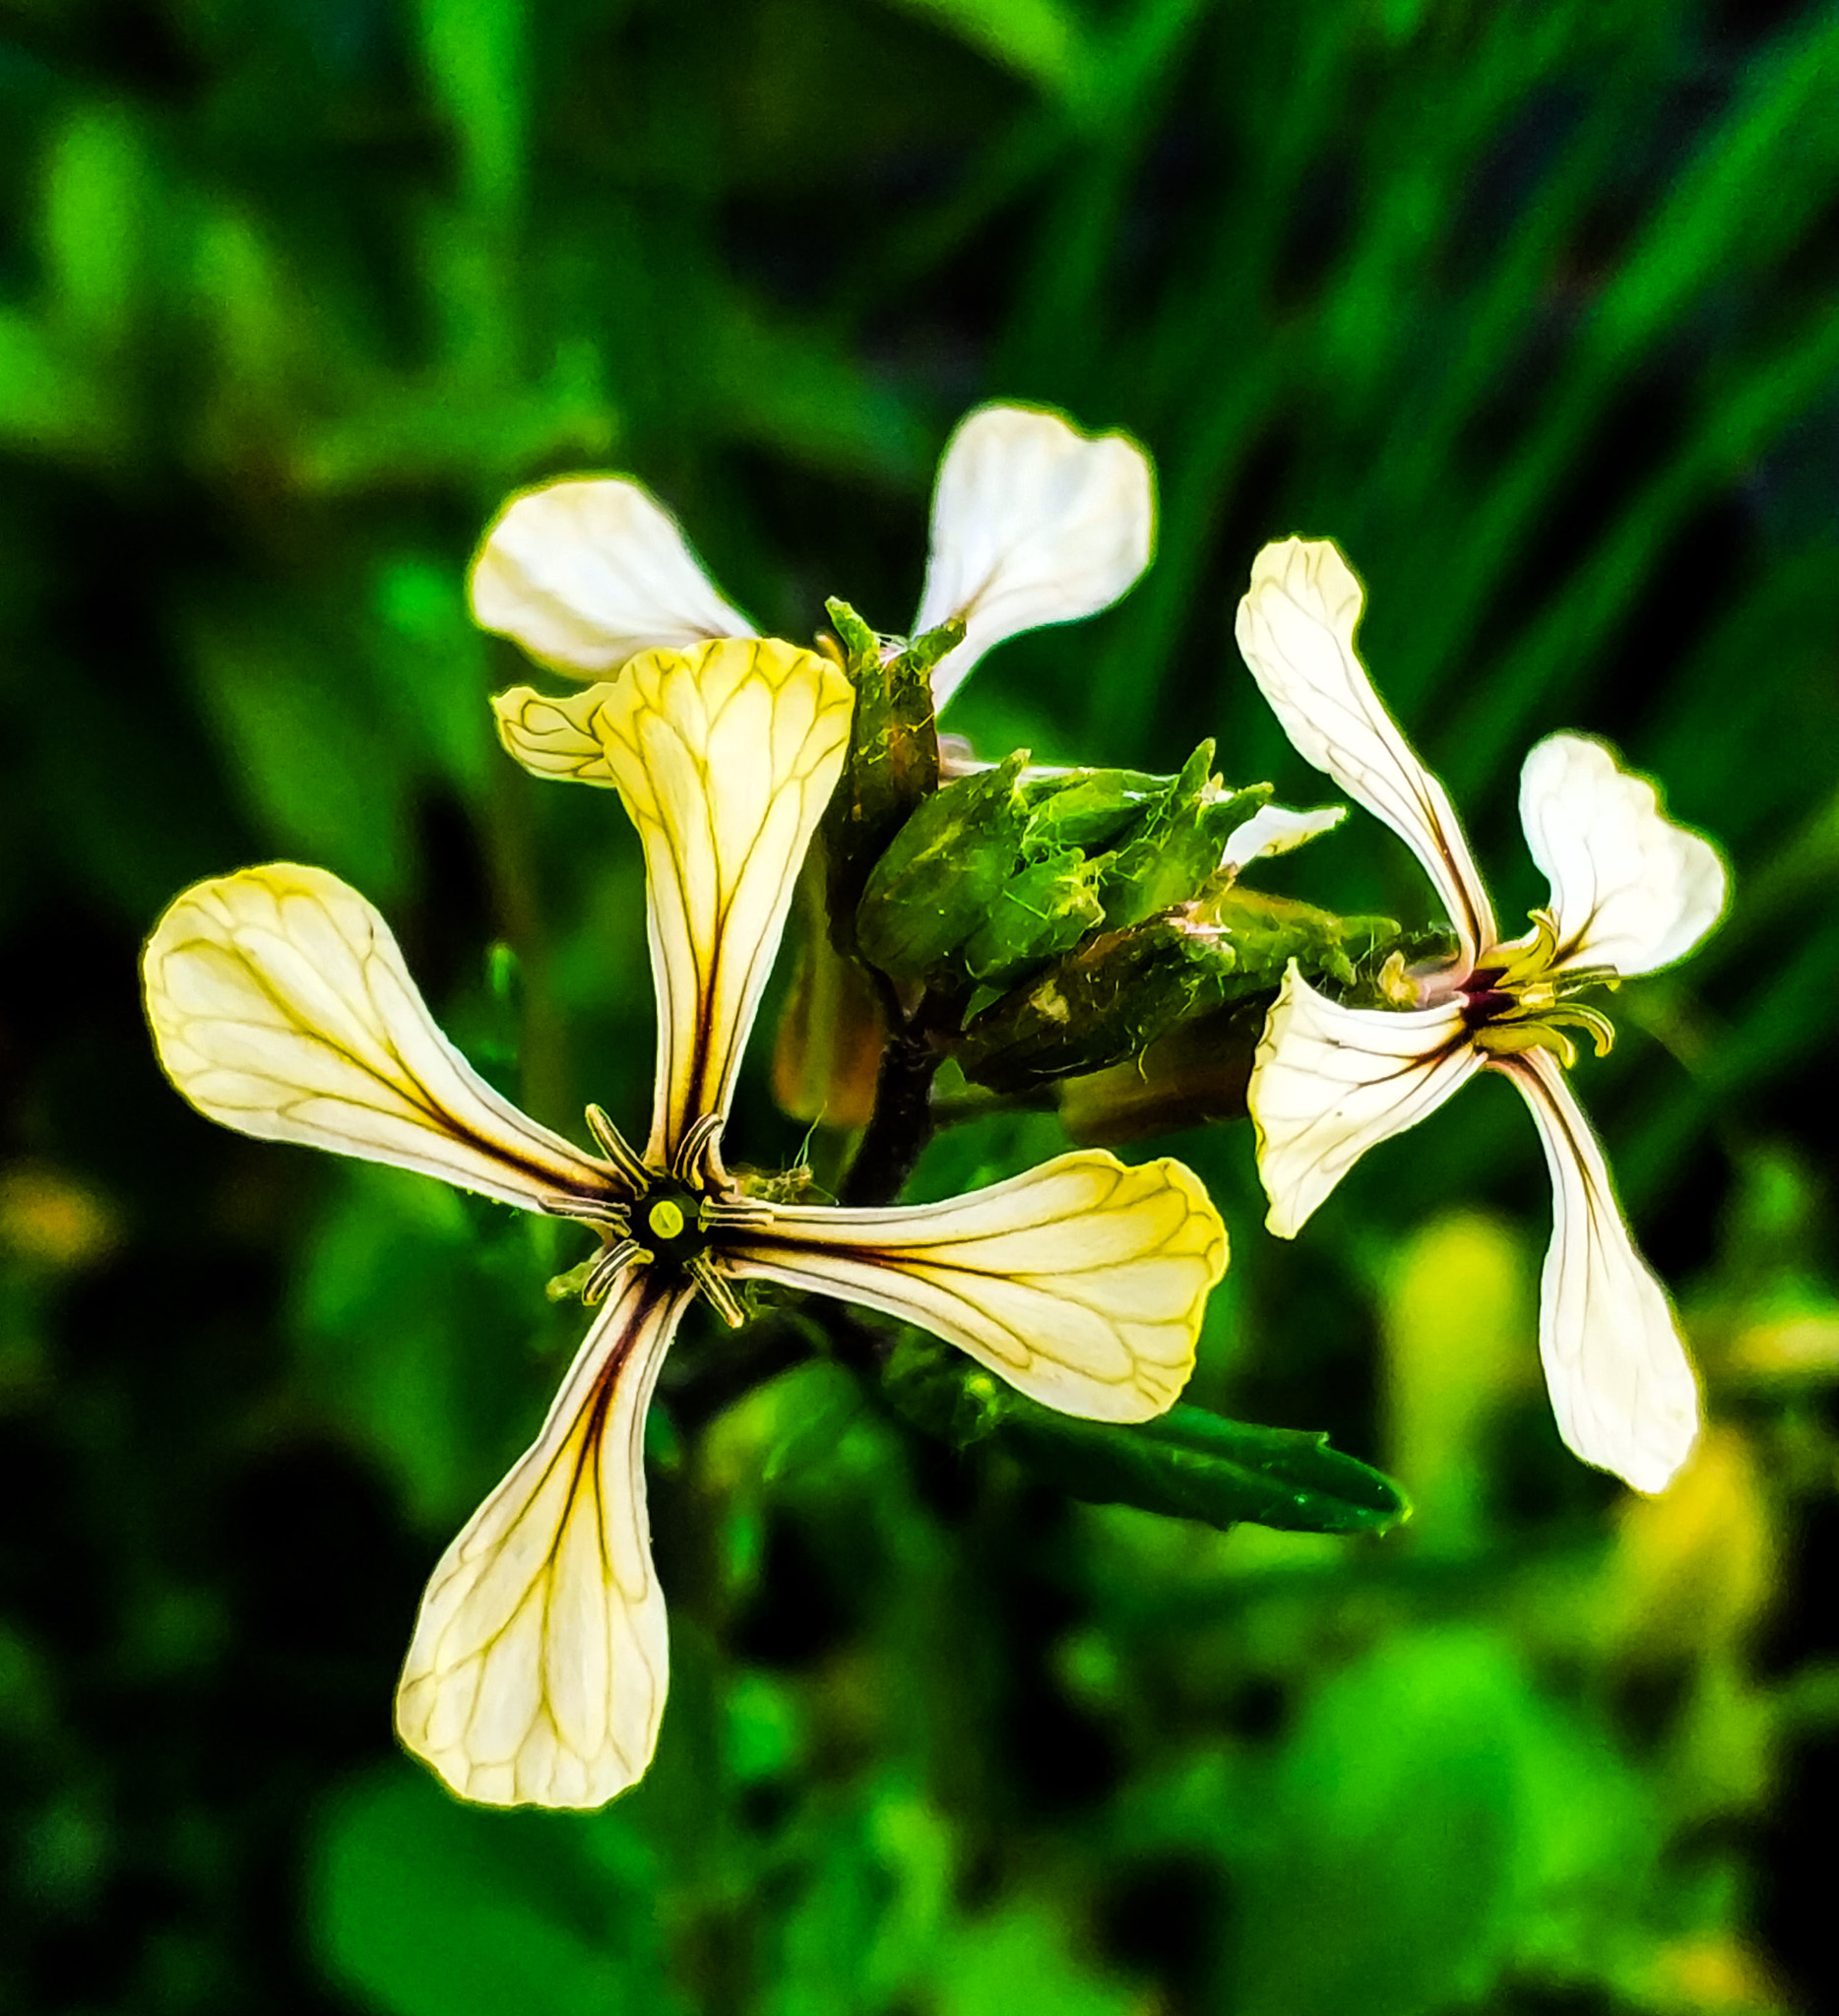 Xiaomi MI6 sample photo. What kind of flower is this? photography